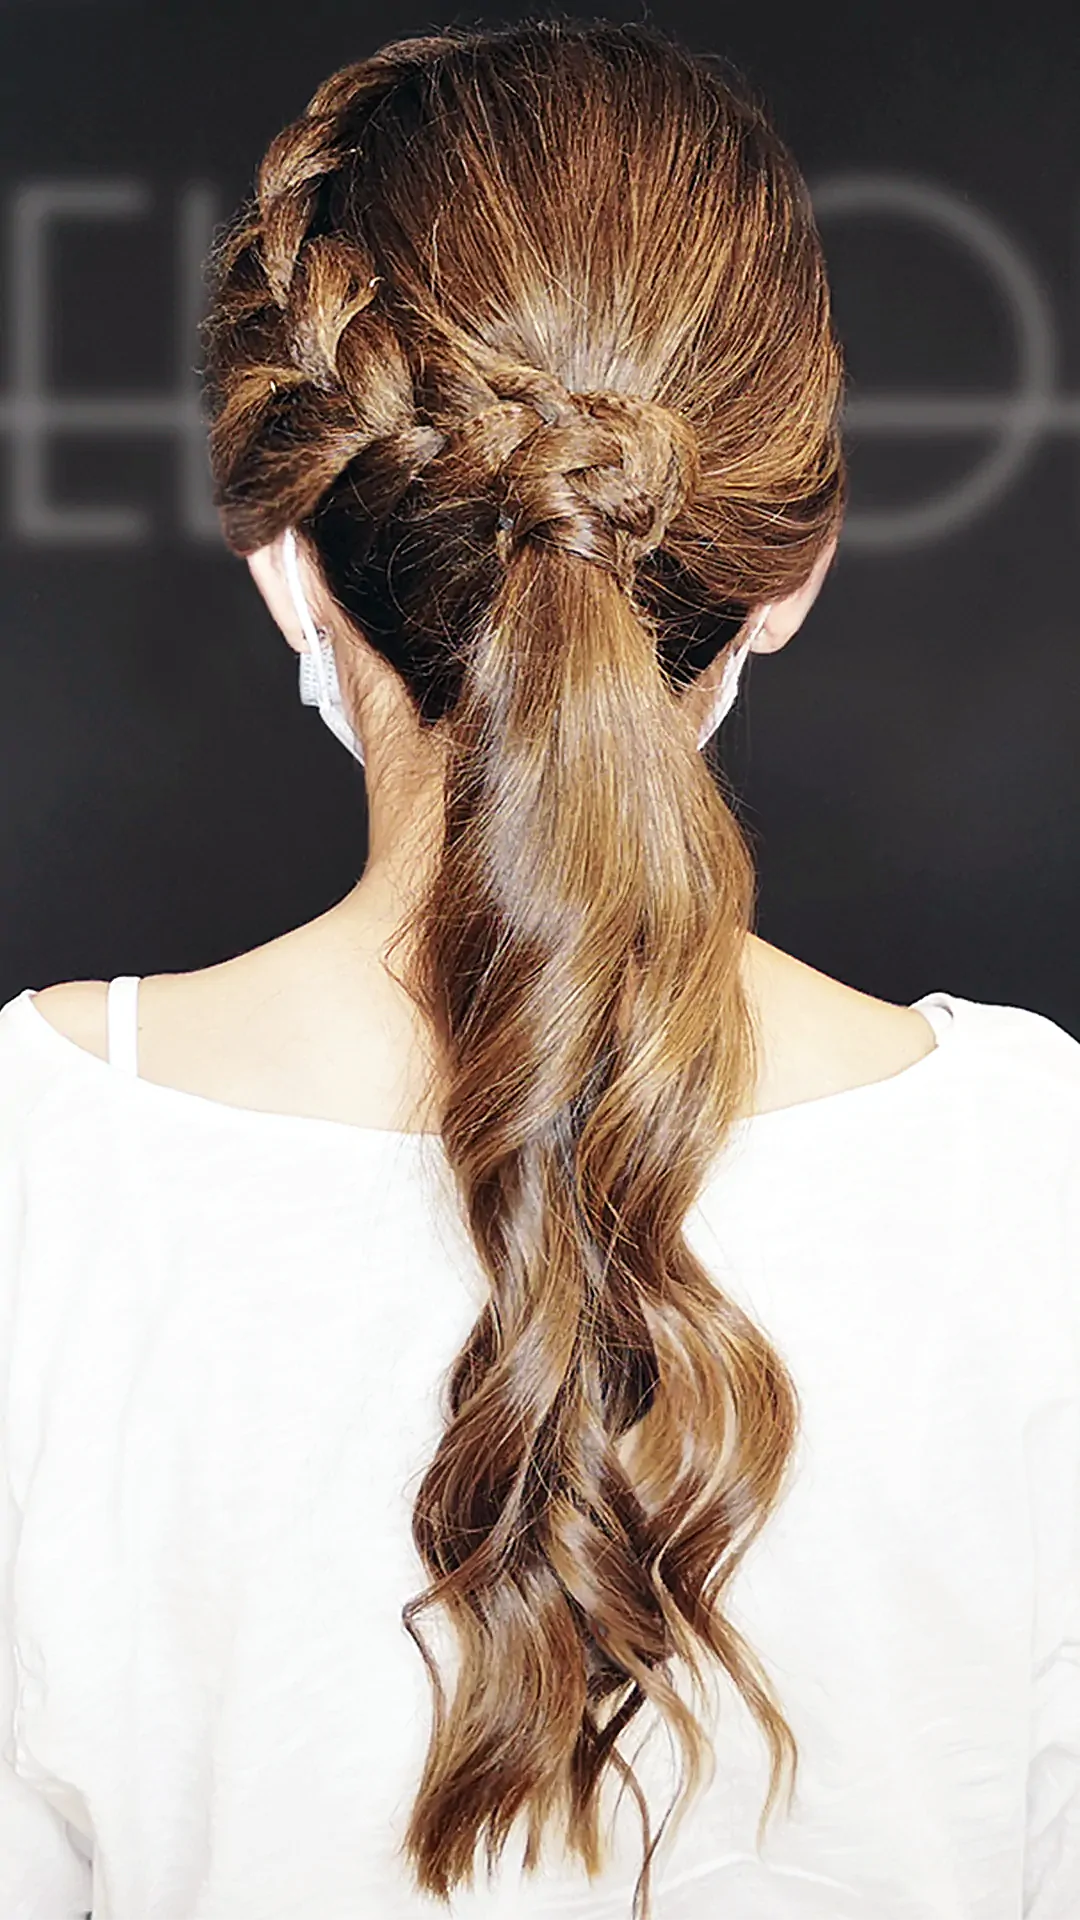 Perruqueria LeLook Sabadell: Textured Braided Ponytail